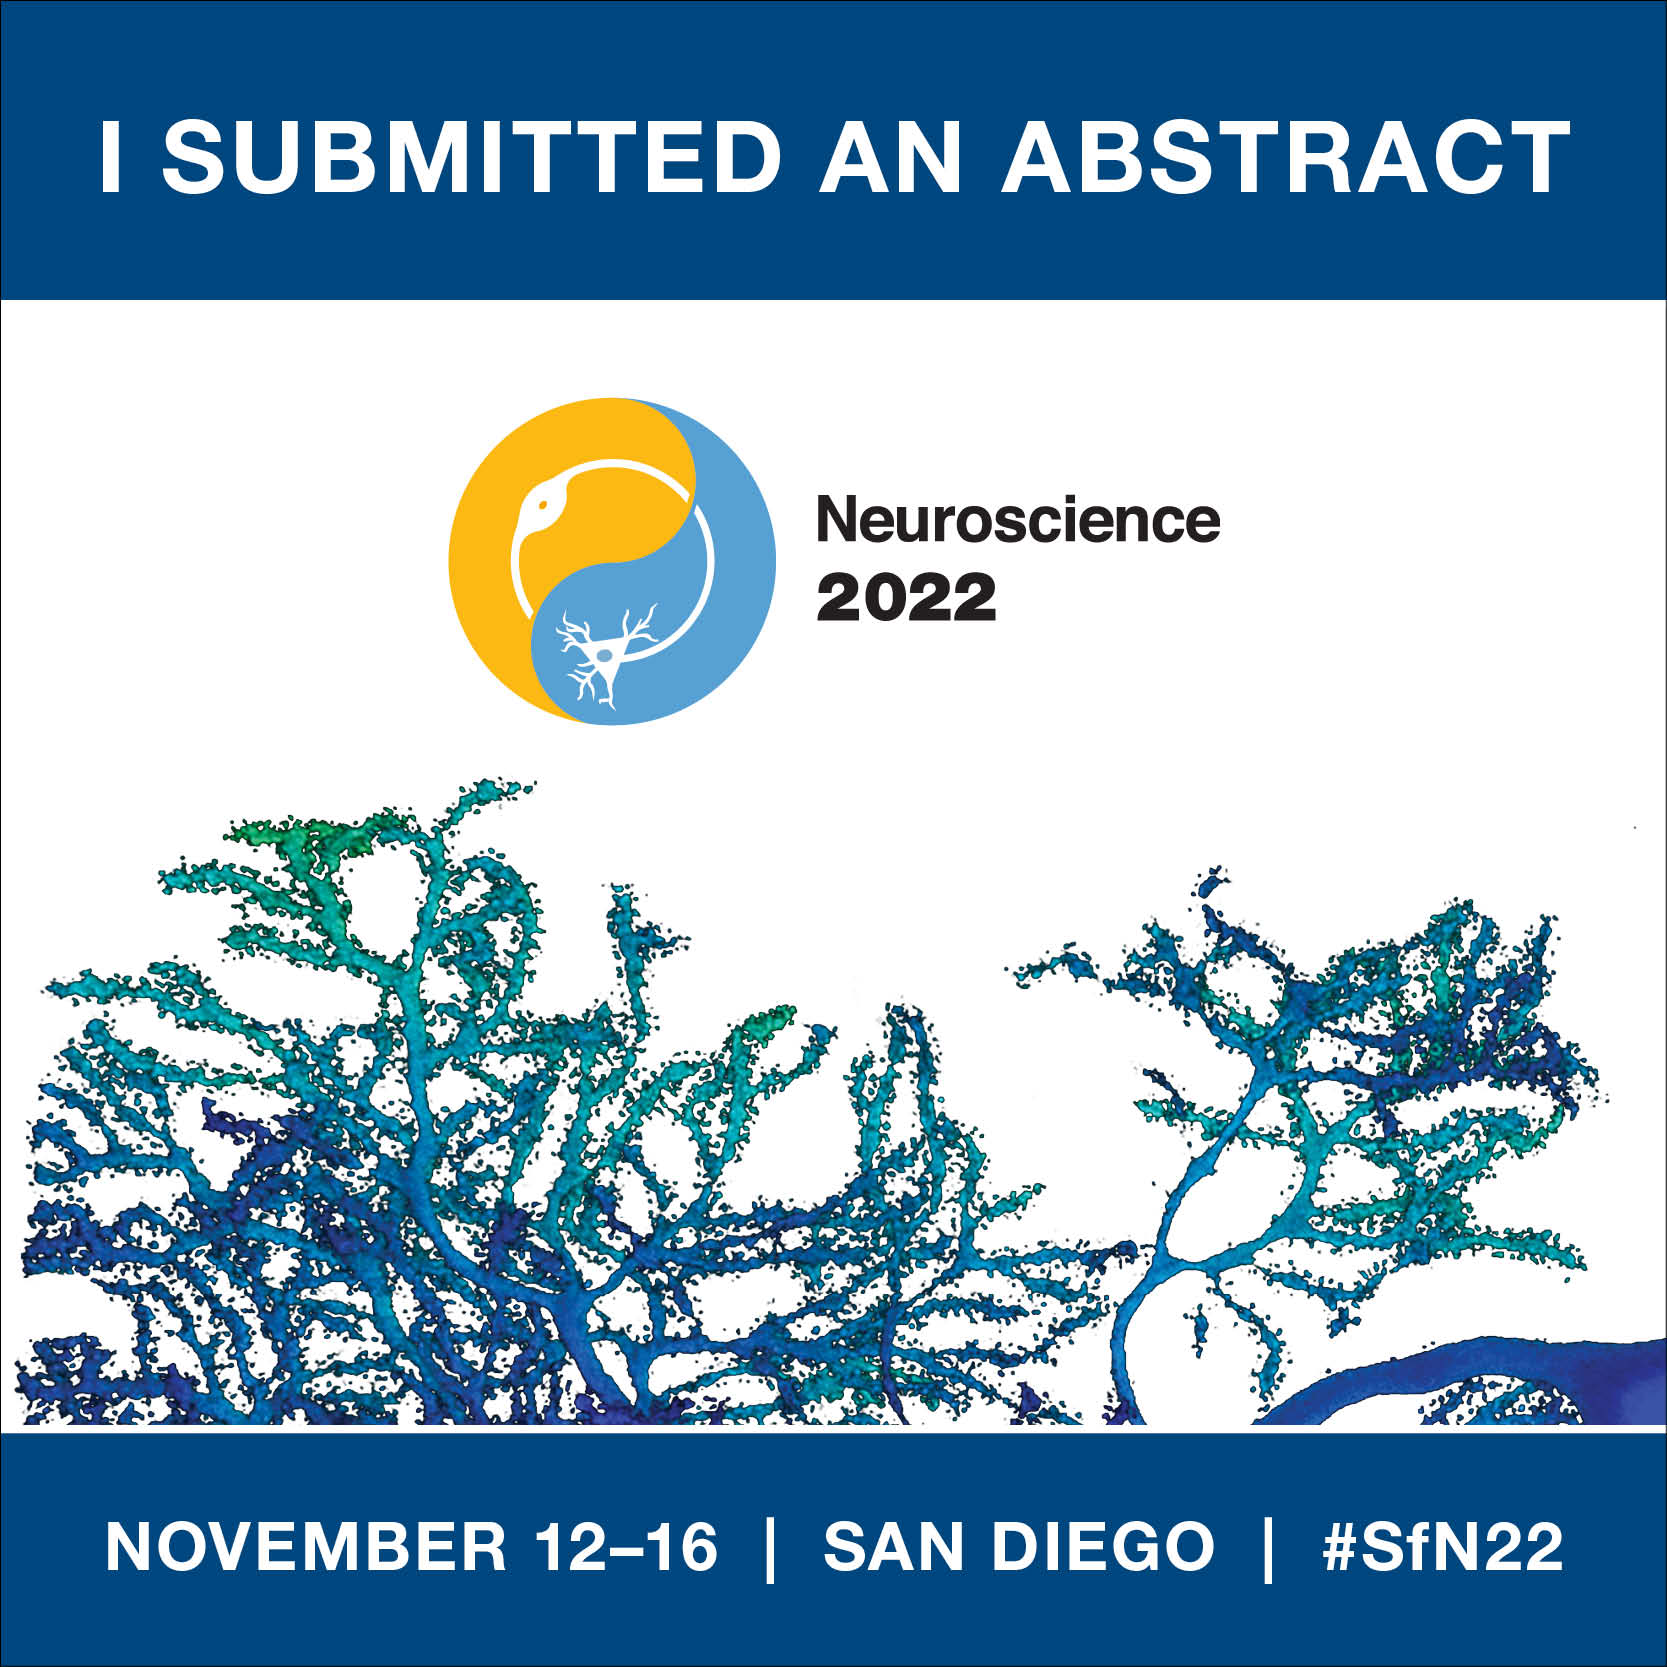 Image that says "I submitted an abstract" with the Neuroscience 2022 logo below the text.